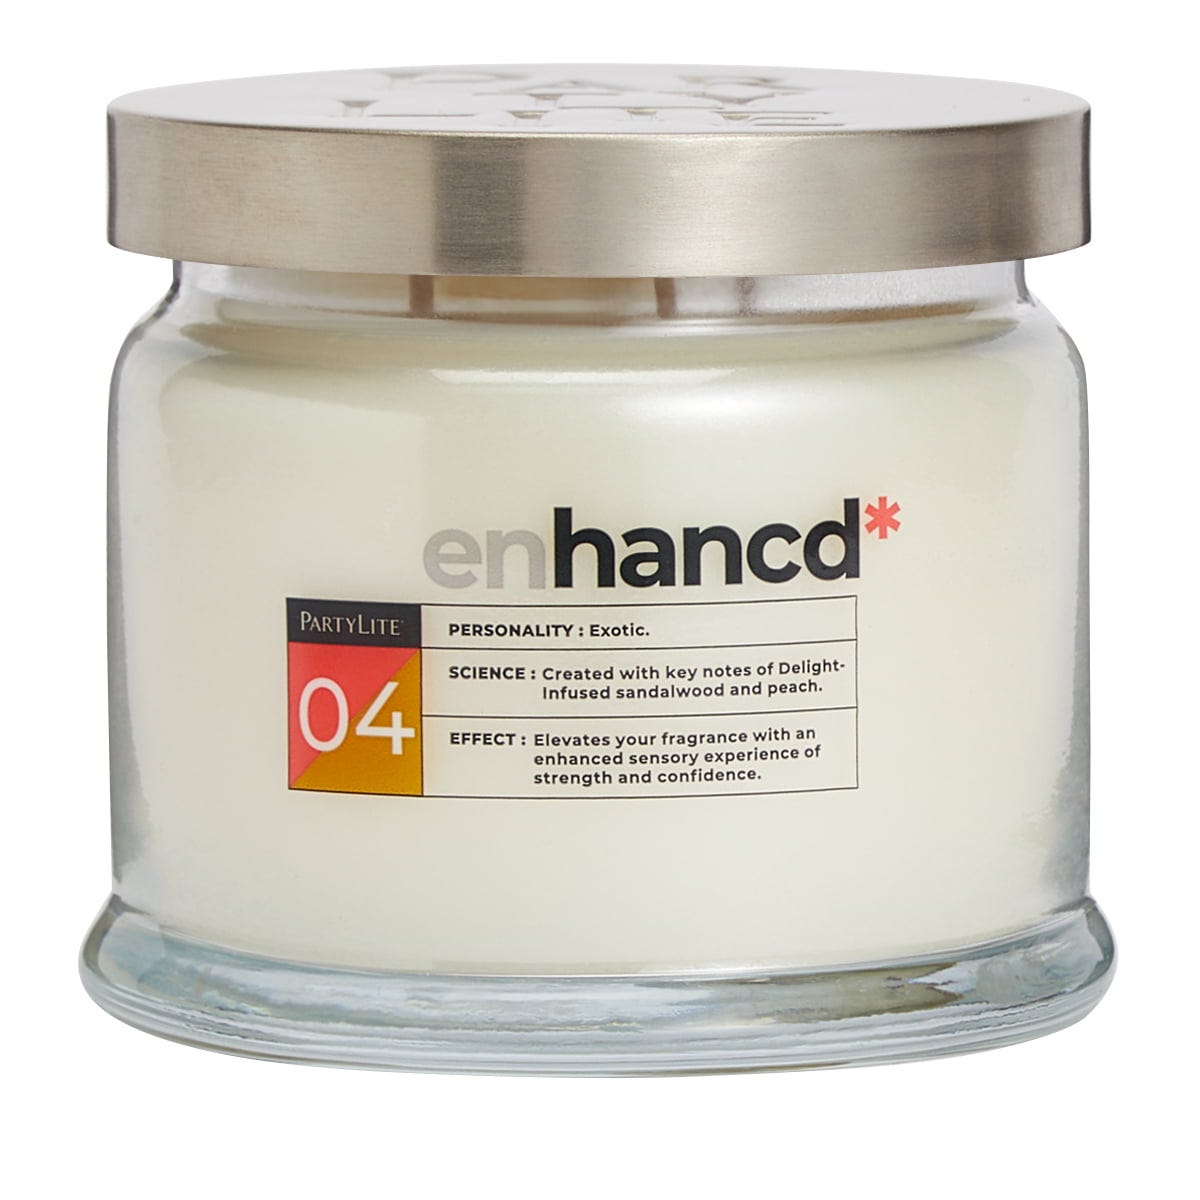 Enhancd* 04 3-Wick Jar Candle - PartyLite US